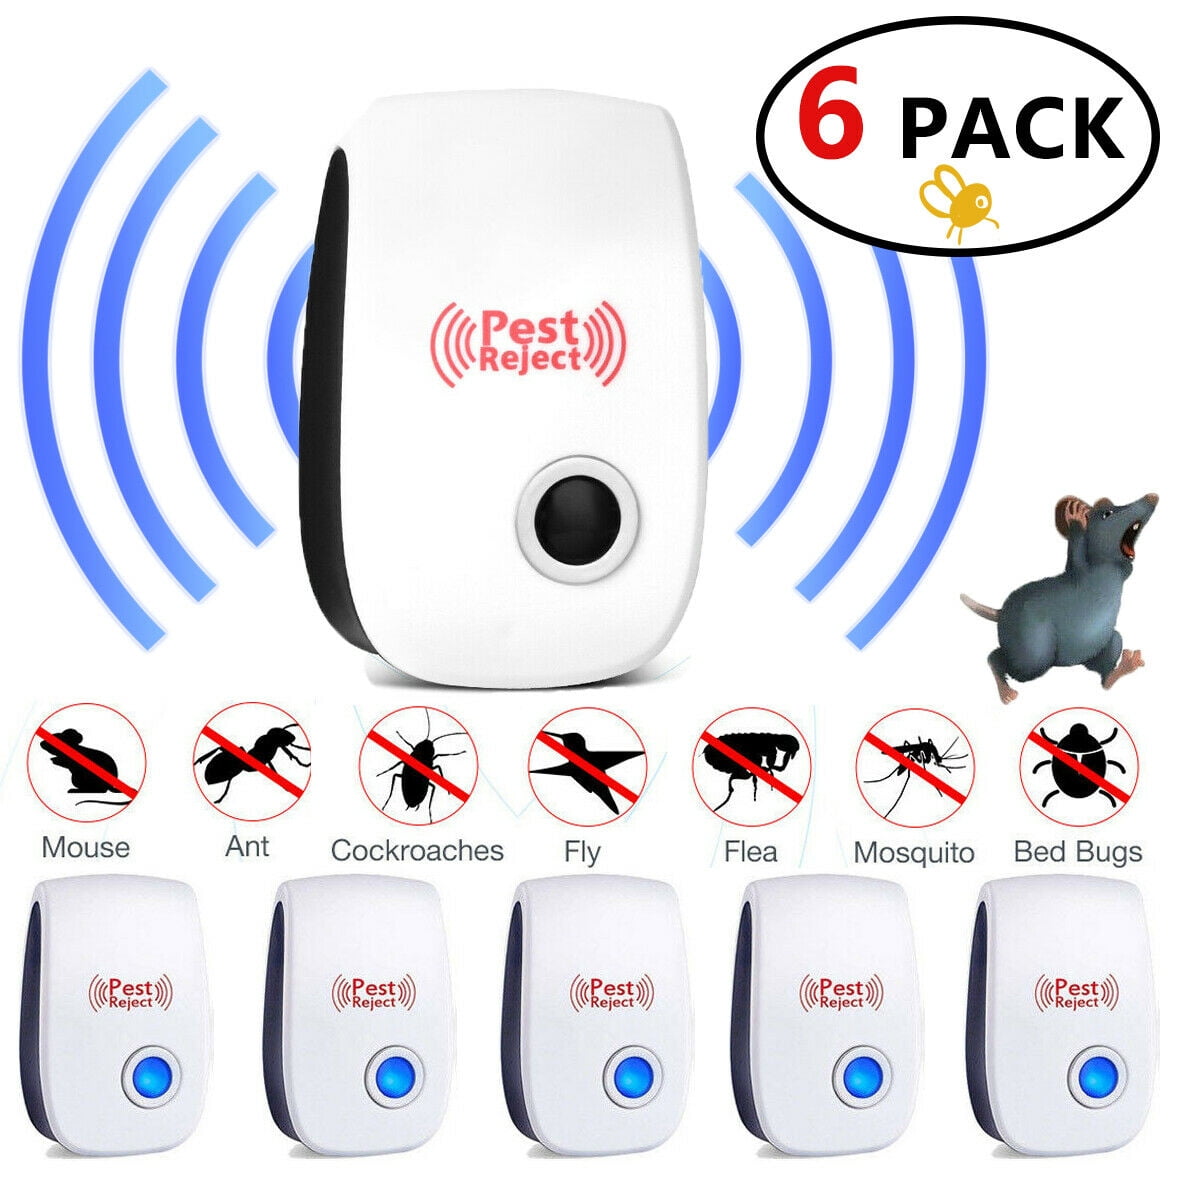 Ultrasonic Pest Repeller Electronic Insect Mouse Rat Repellent Control Device 